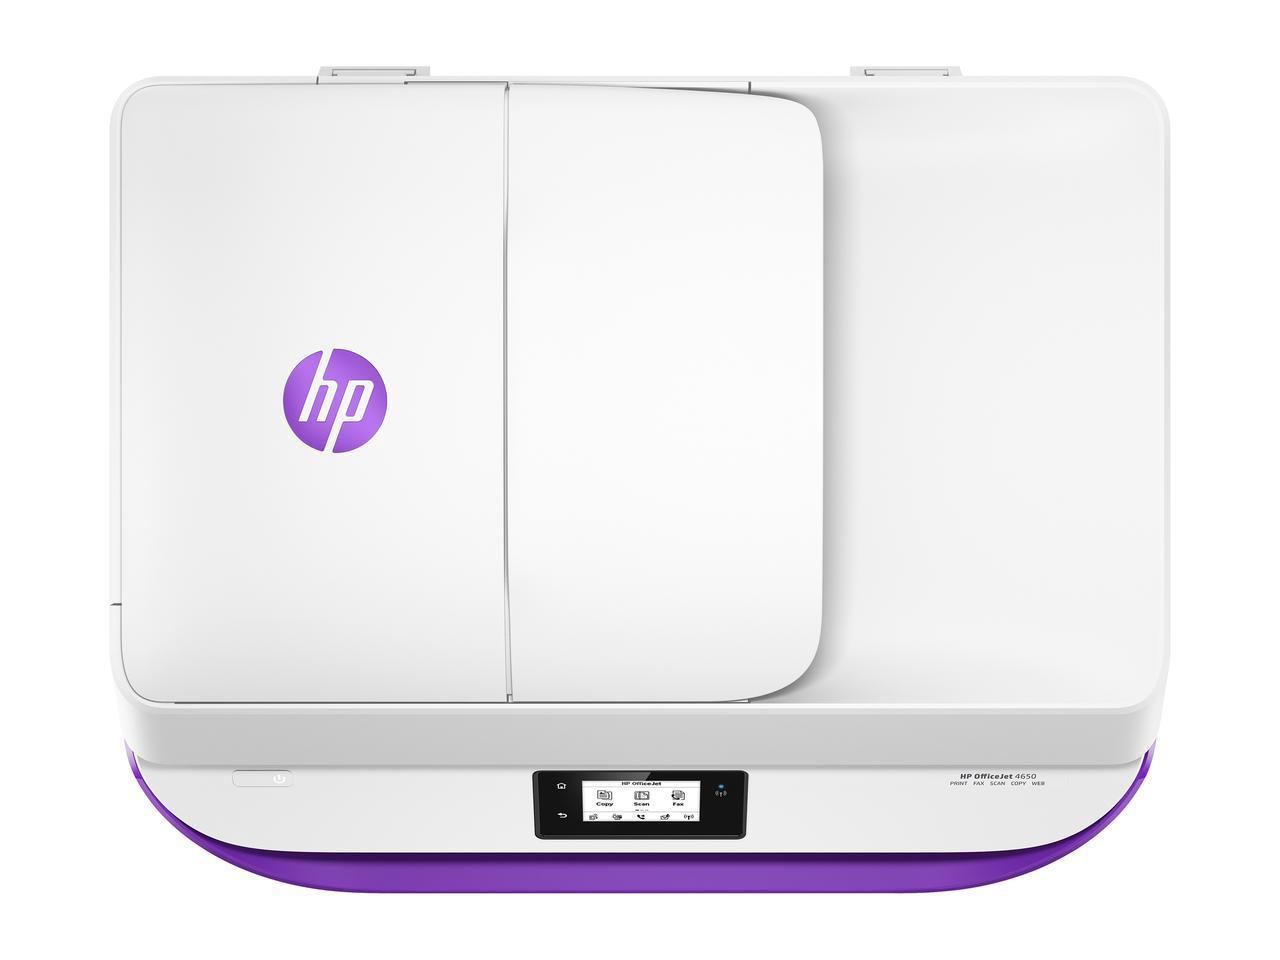 HP OfficeJet 4650 Wireless All-in-One Photo Printer Ink included | eBay